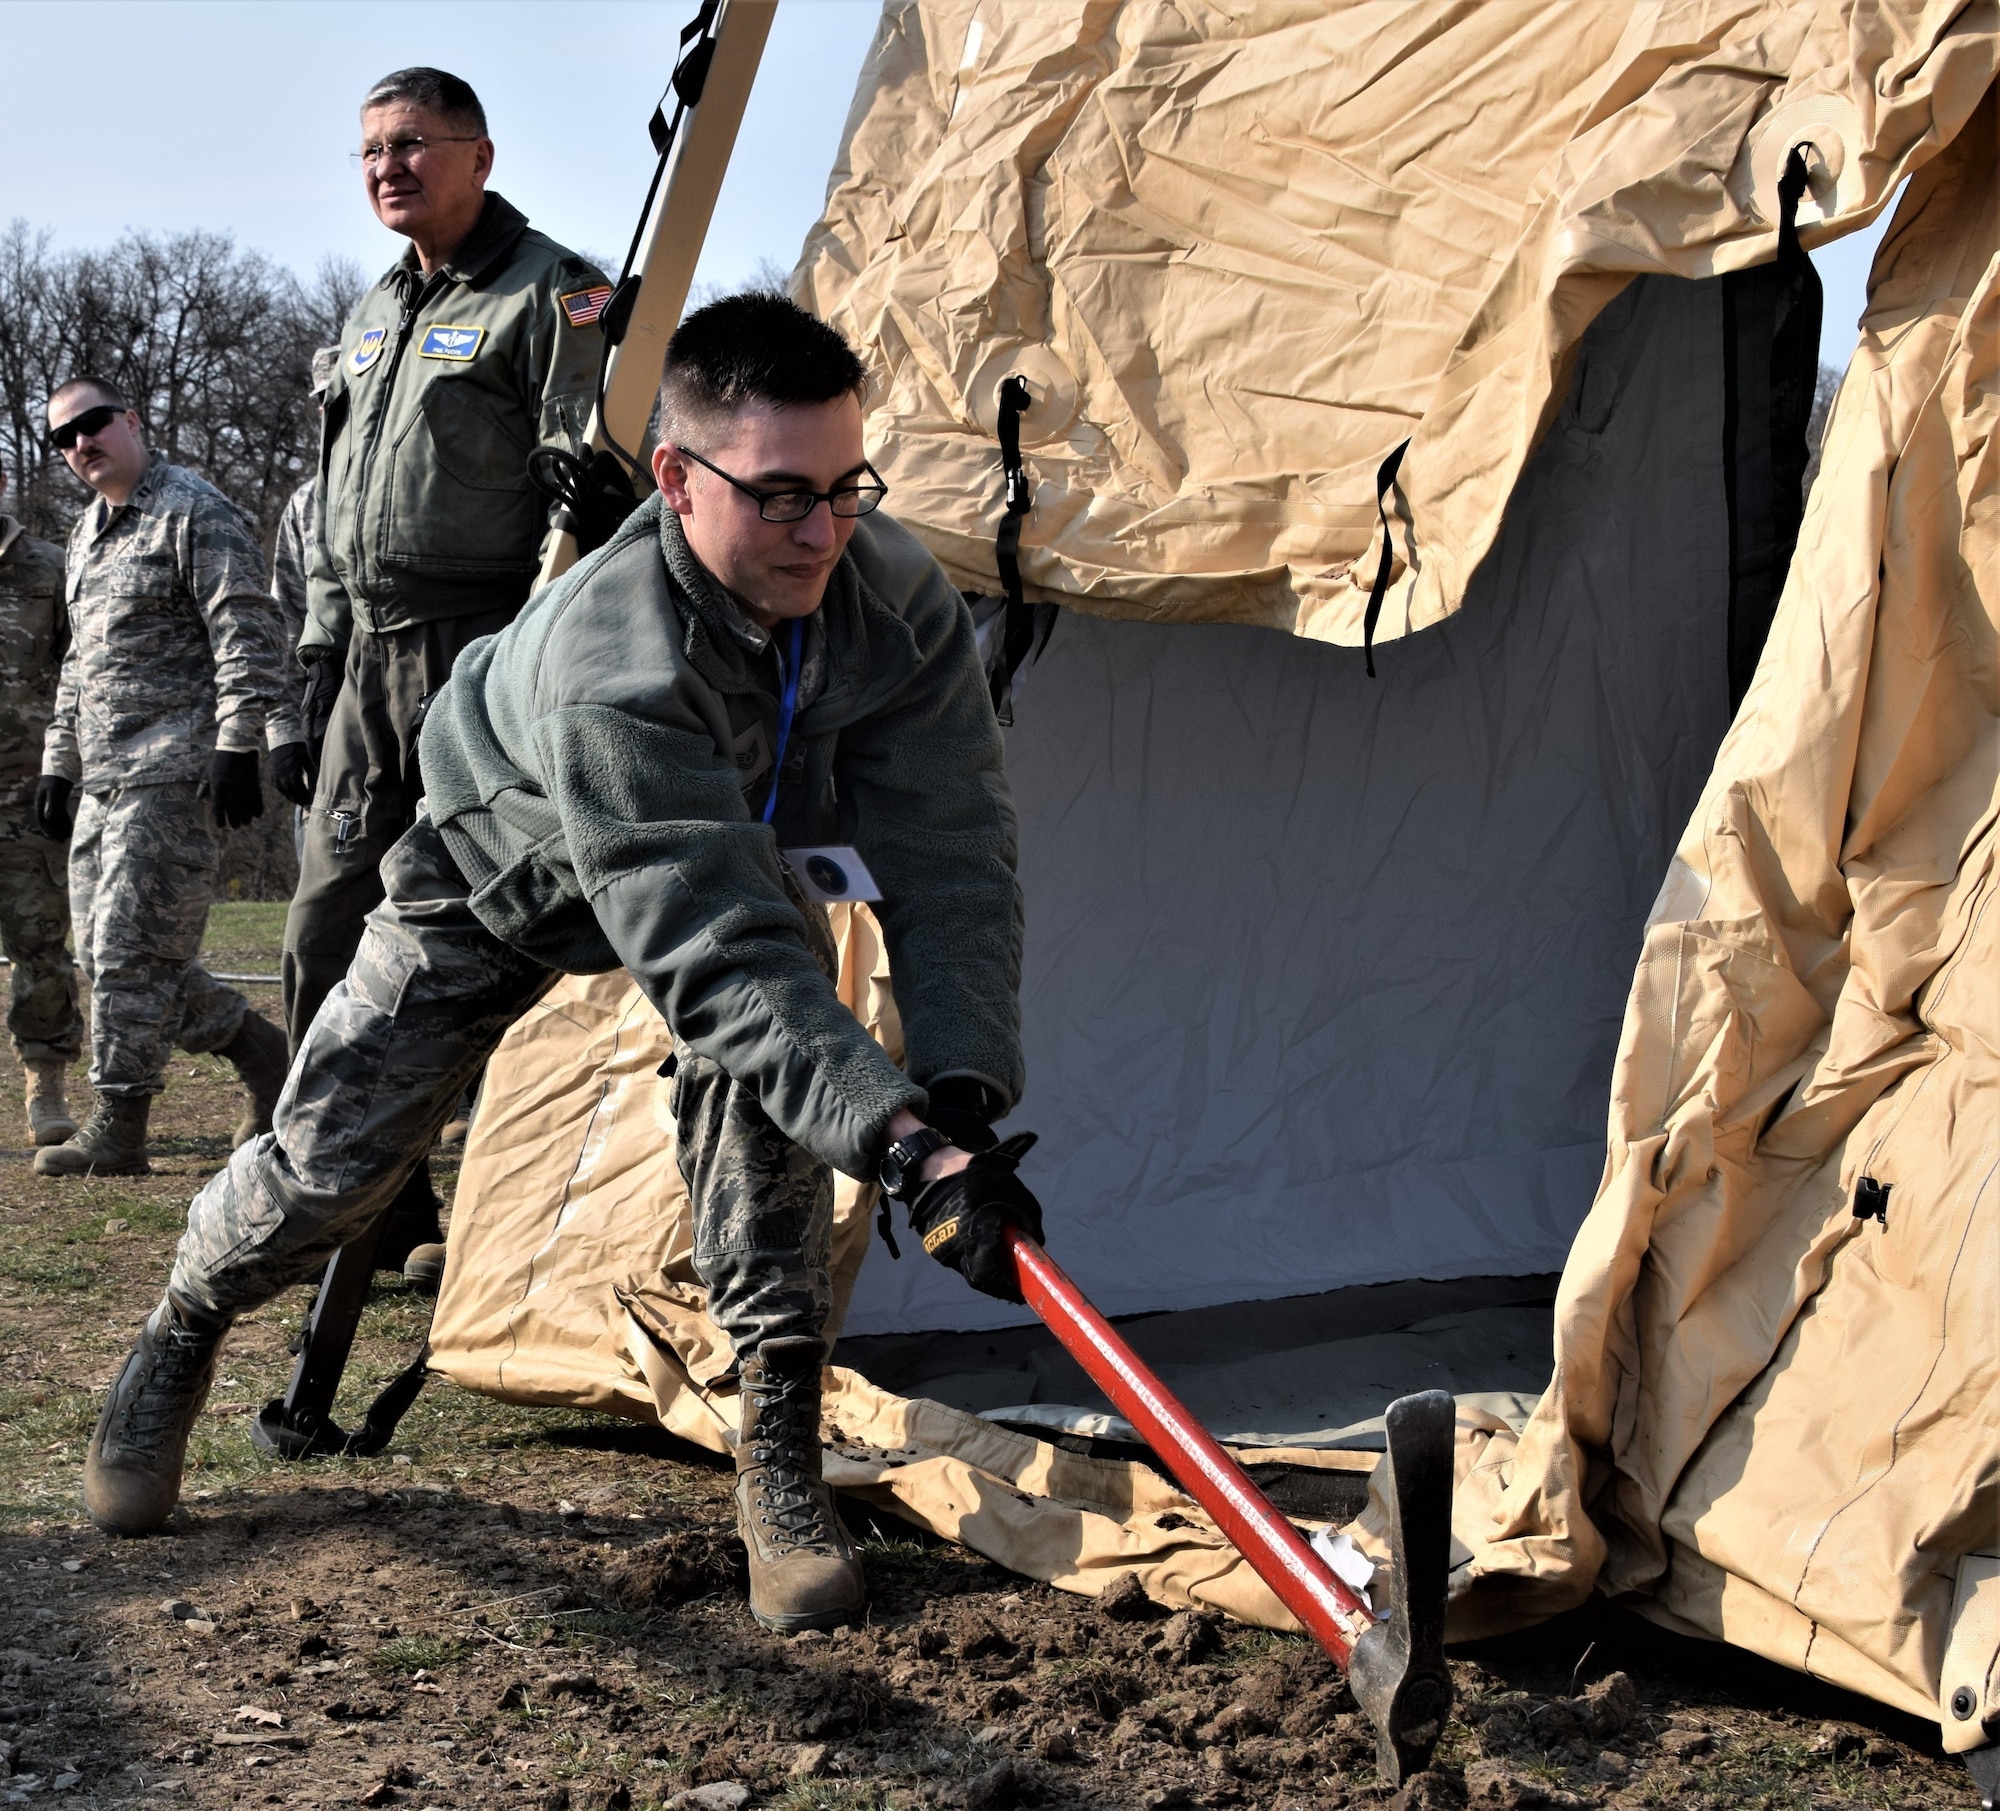 Tech. Sgt. Christopher Sarchioto, 86th Medical Group, Ramstein Air Base Germany, prepares an expeditionary medical support system (EMEDS) at Cincu Military Base, Romania, April 4, 2019, during exercise Vigorous Warrior 19. EMEDS are modular field hospitals designed to be deployed and fully operational within six hours of arrival in an area of responsibility. (U.S. Air Force photo illustration)